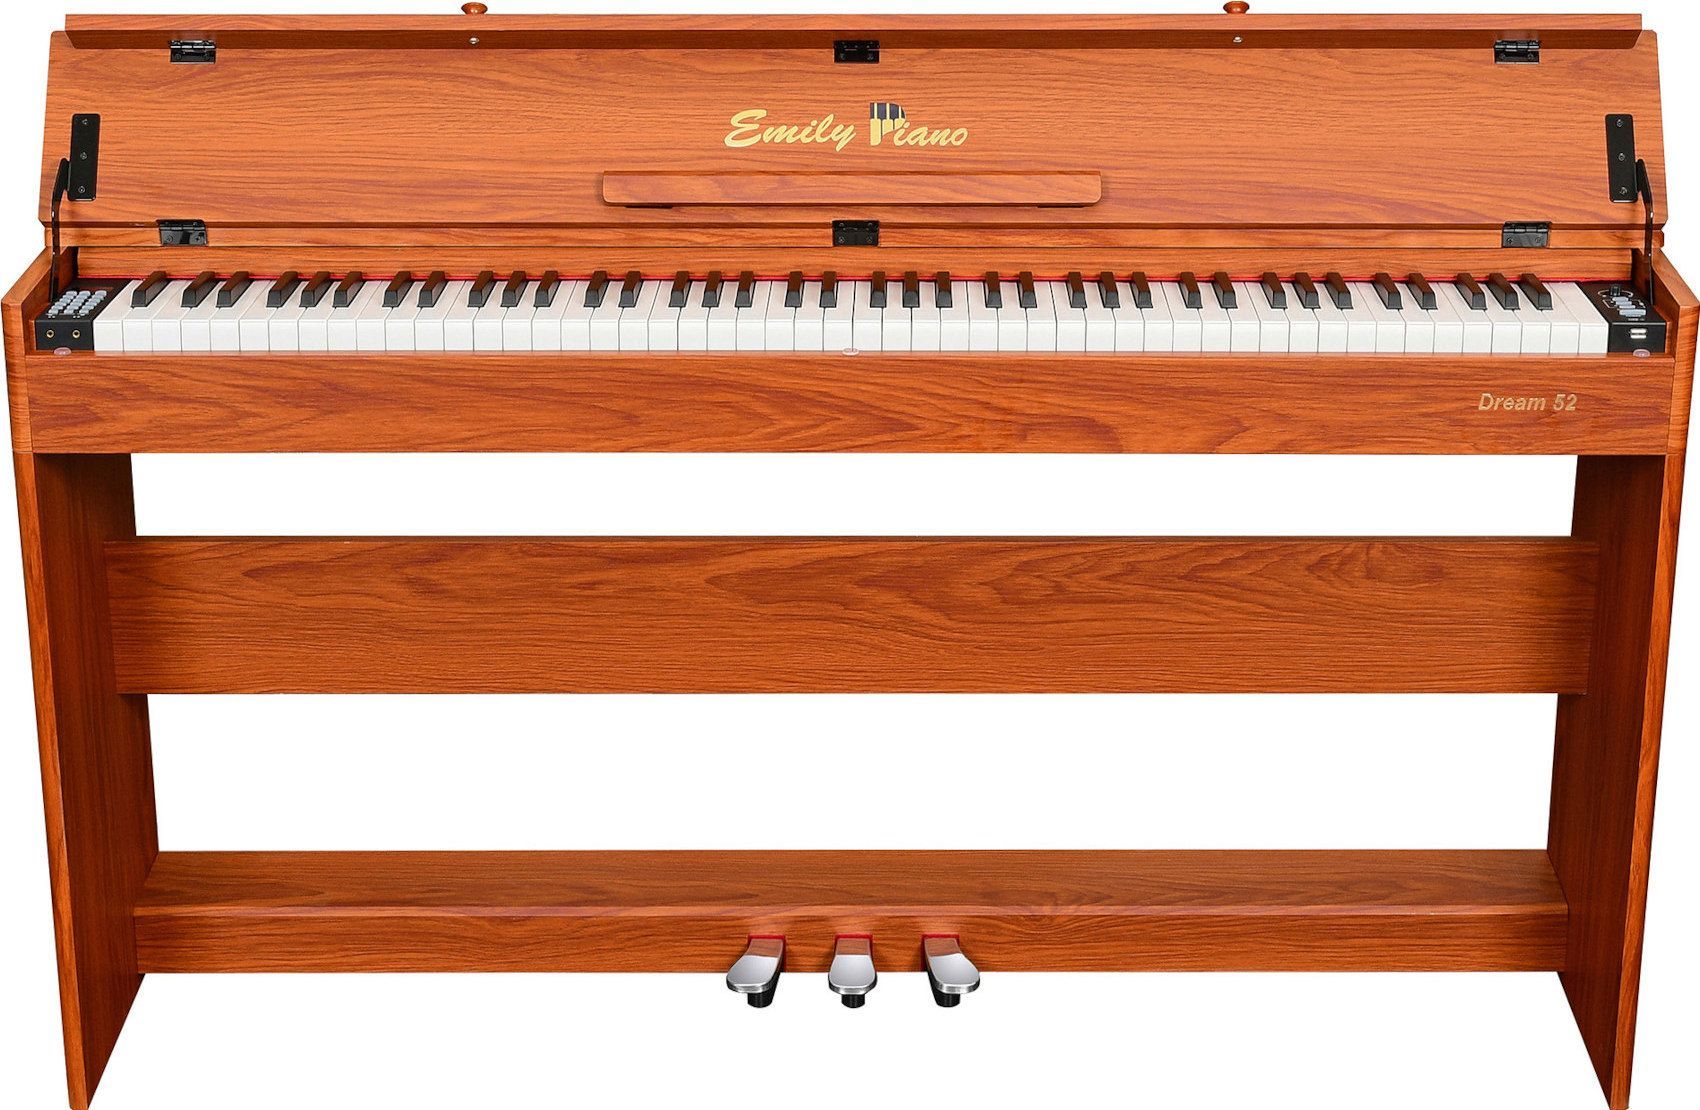 Emily Piano D-52 BR